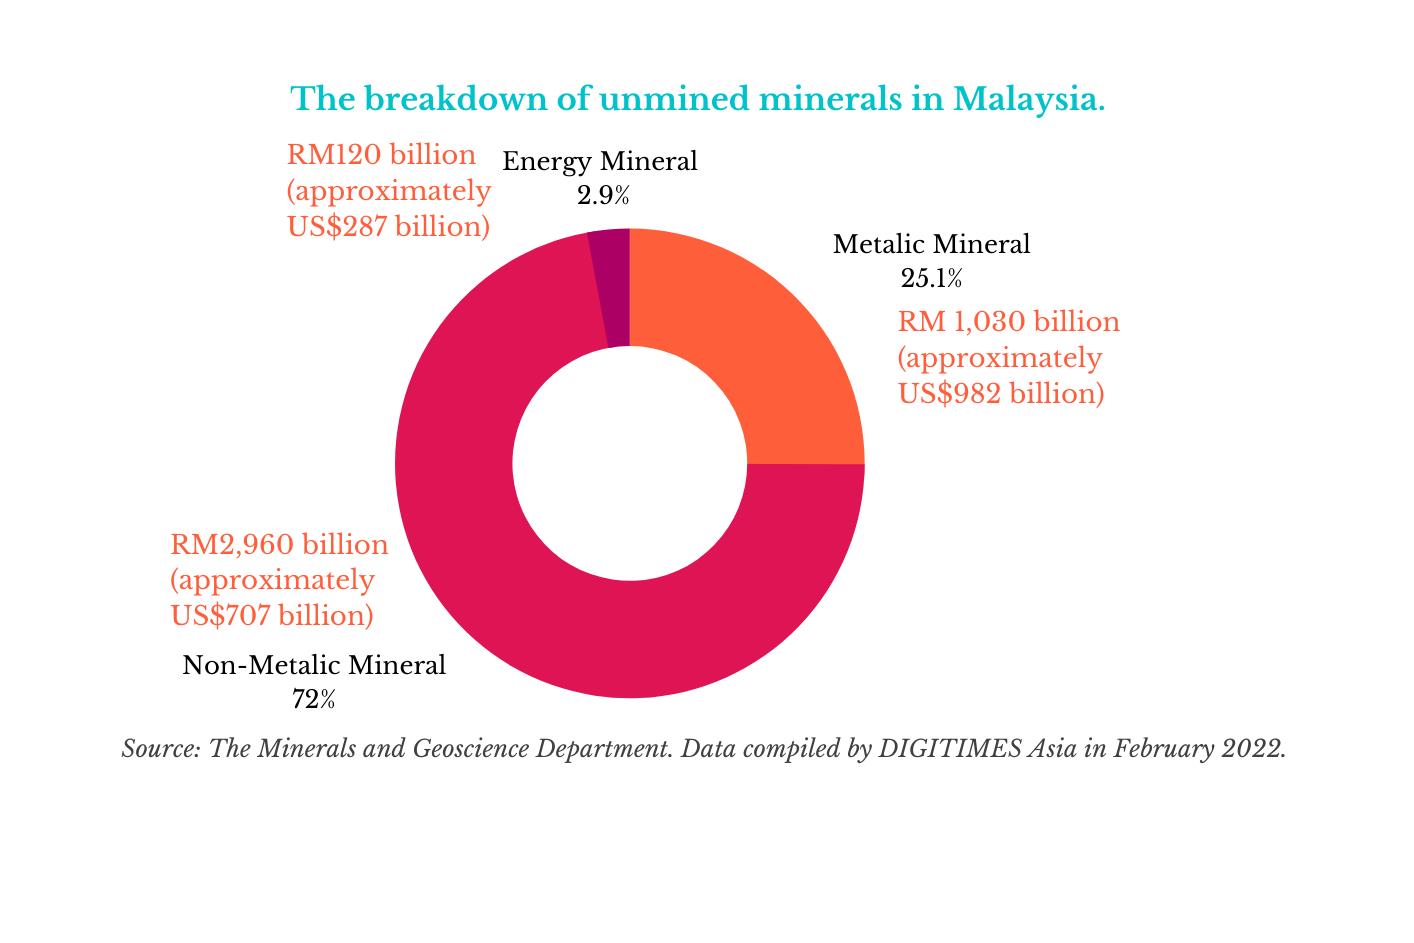 The breakdown of unmined minerals in Malaysia